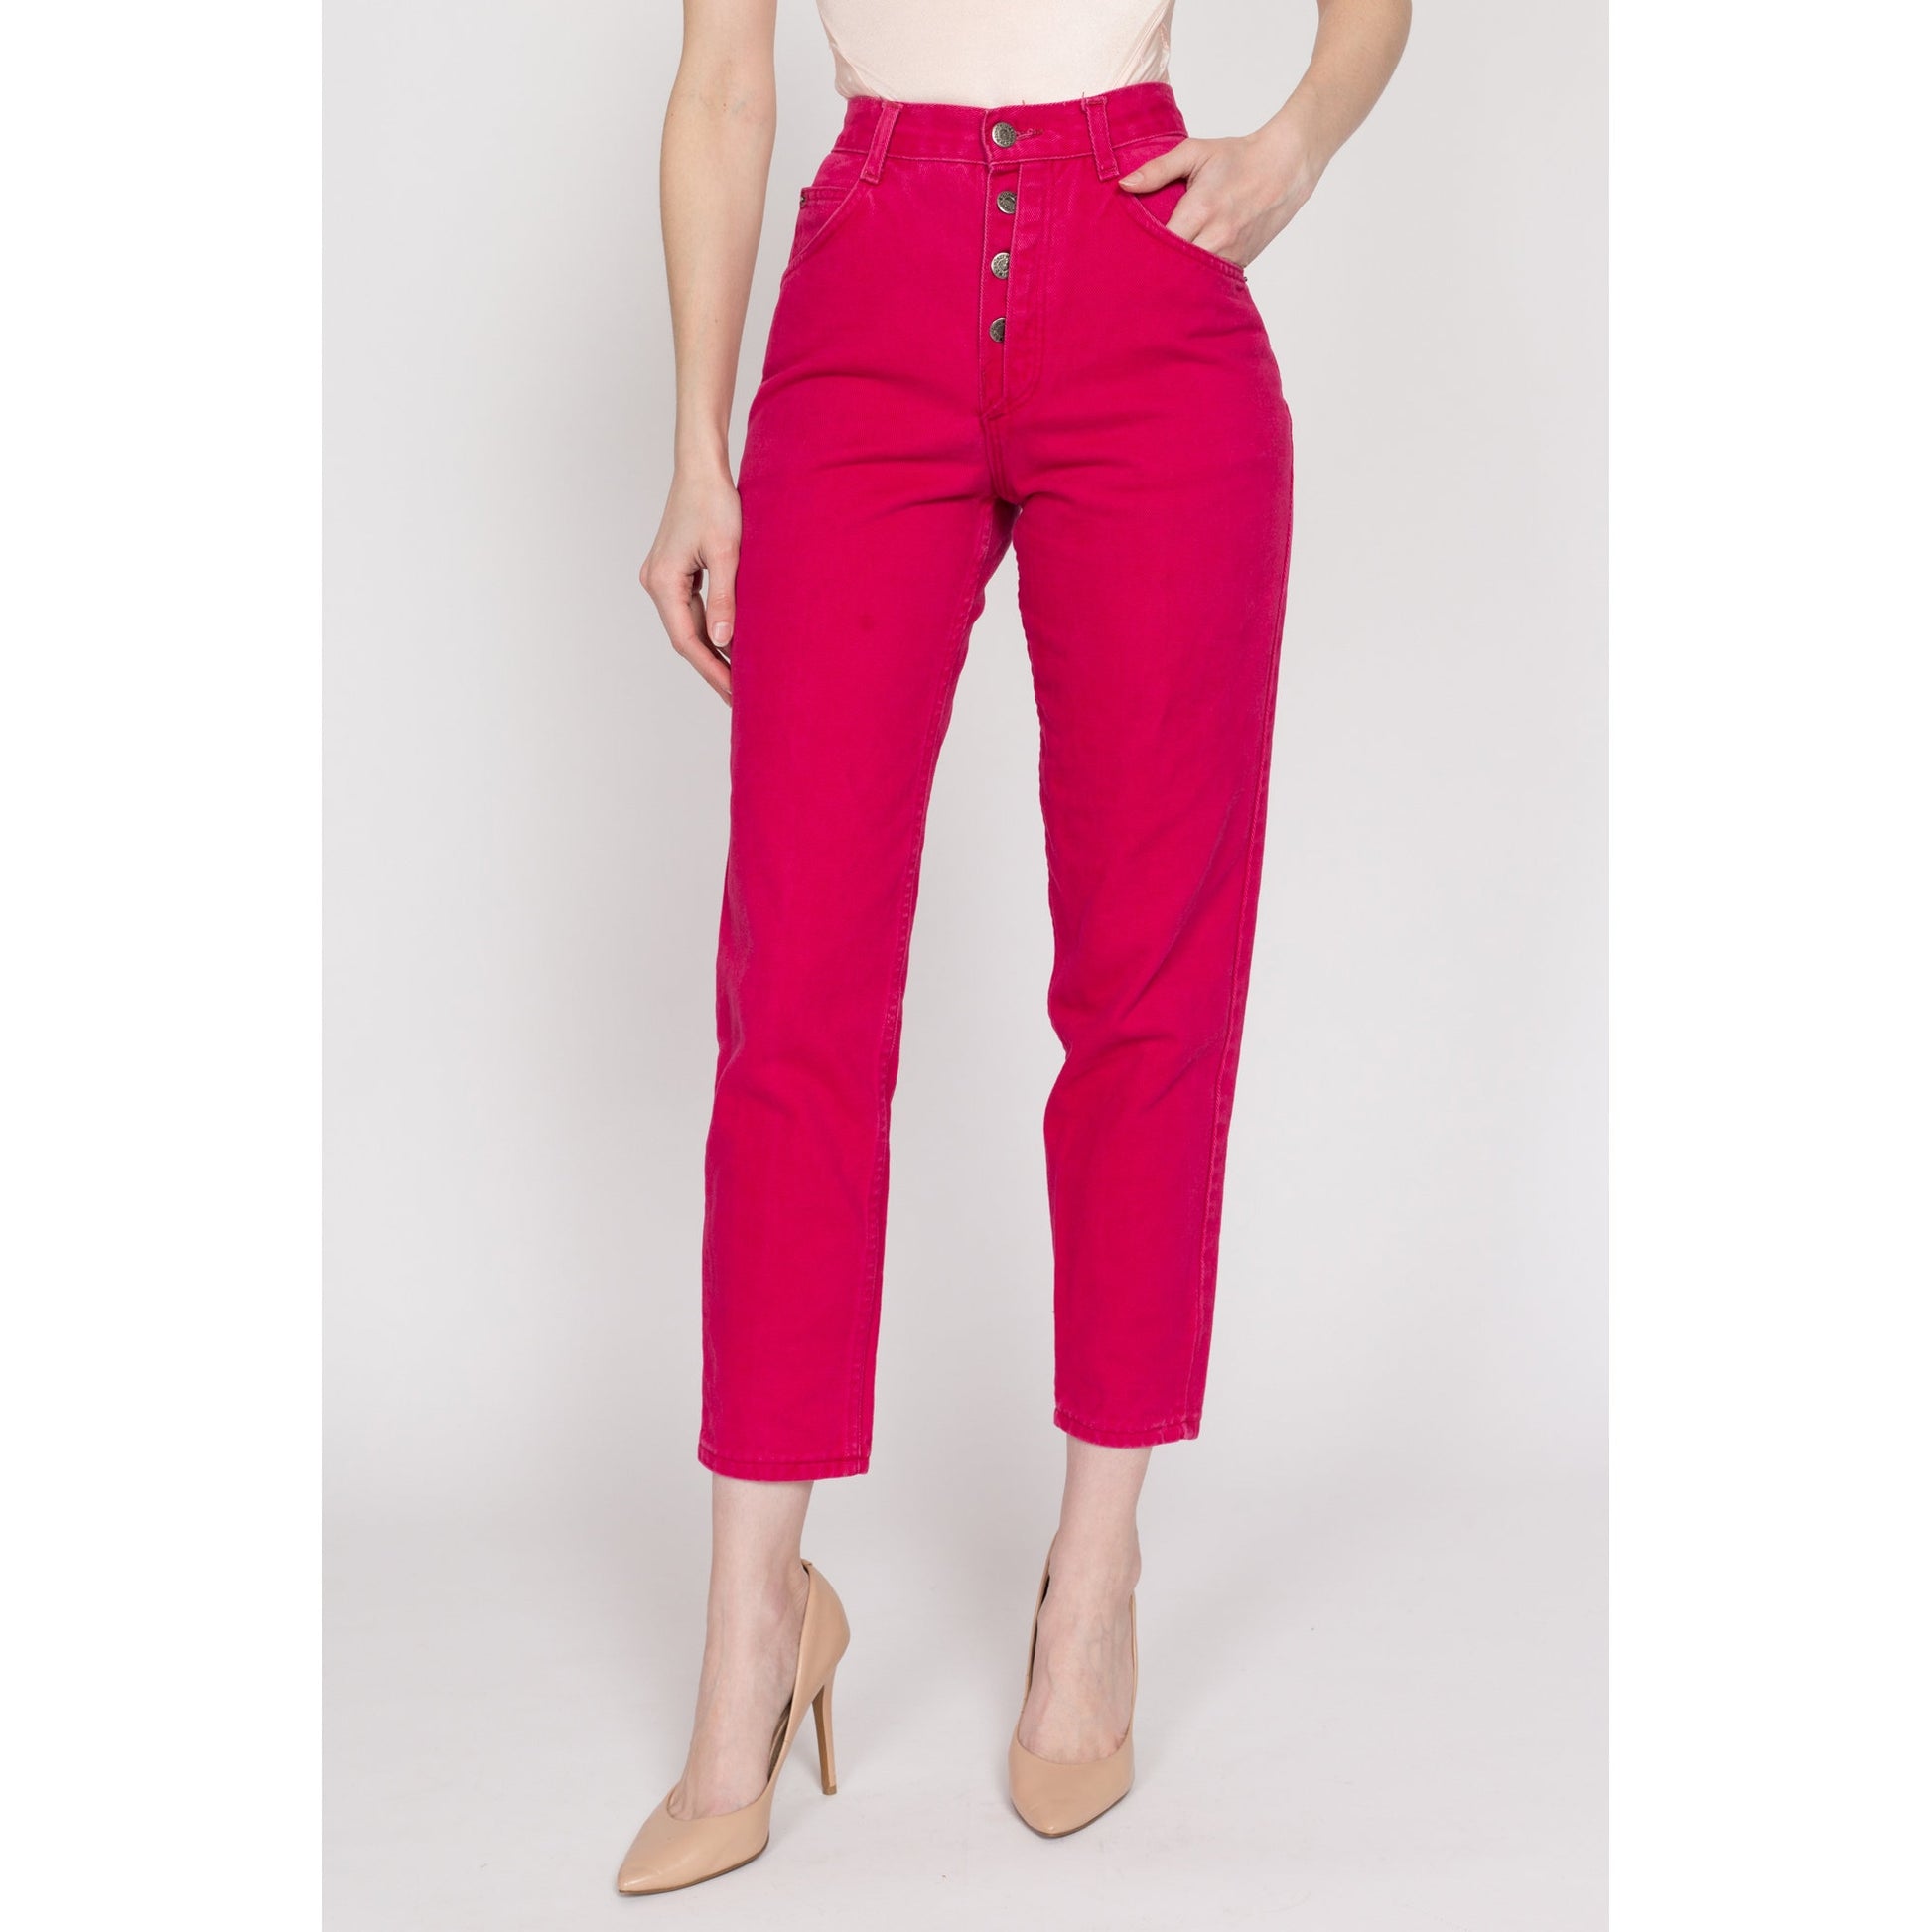 XS 90s Hot Pink Exposed Button Fly Jeans 23.5" | Vintage High Waisted Denim Tapered Leg Mom Jeans